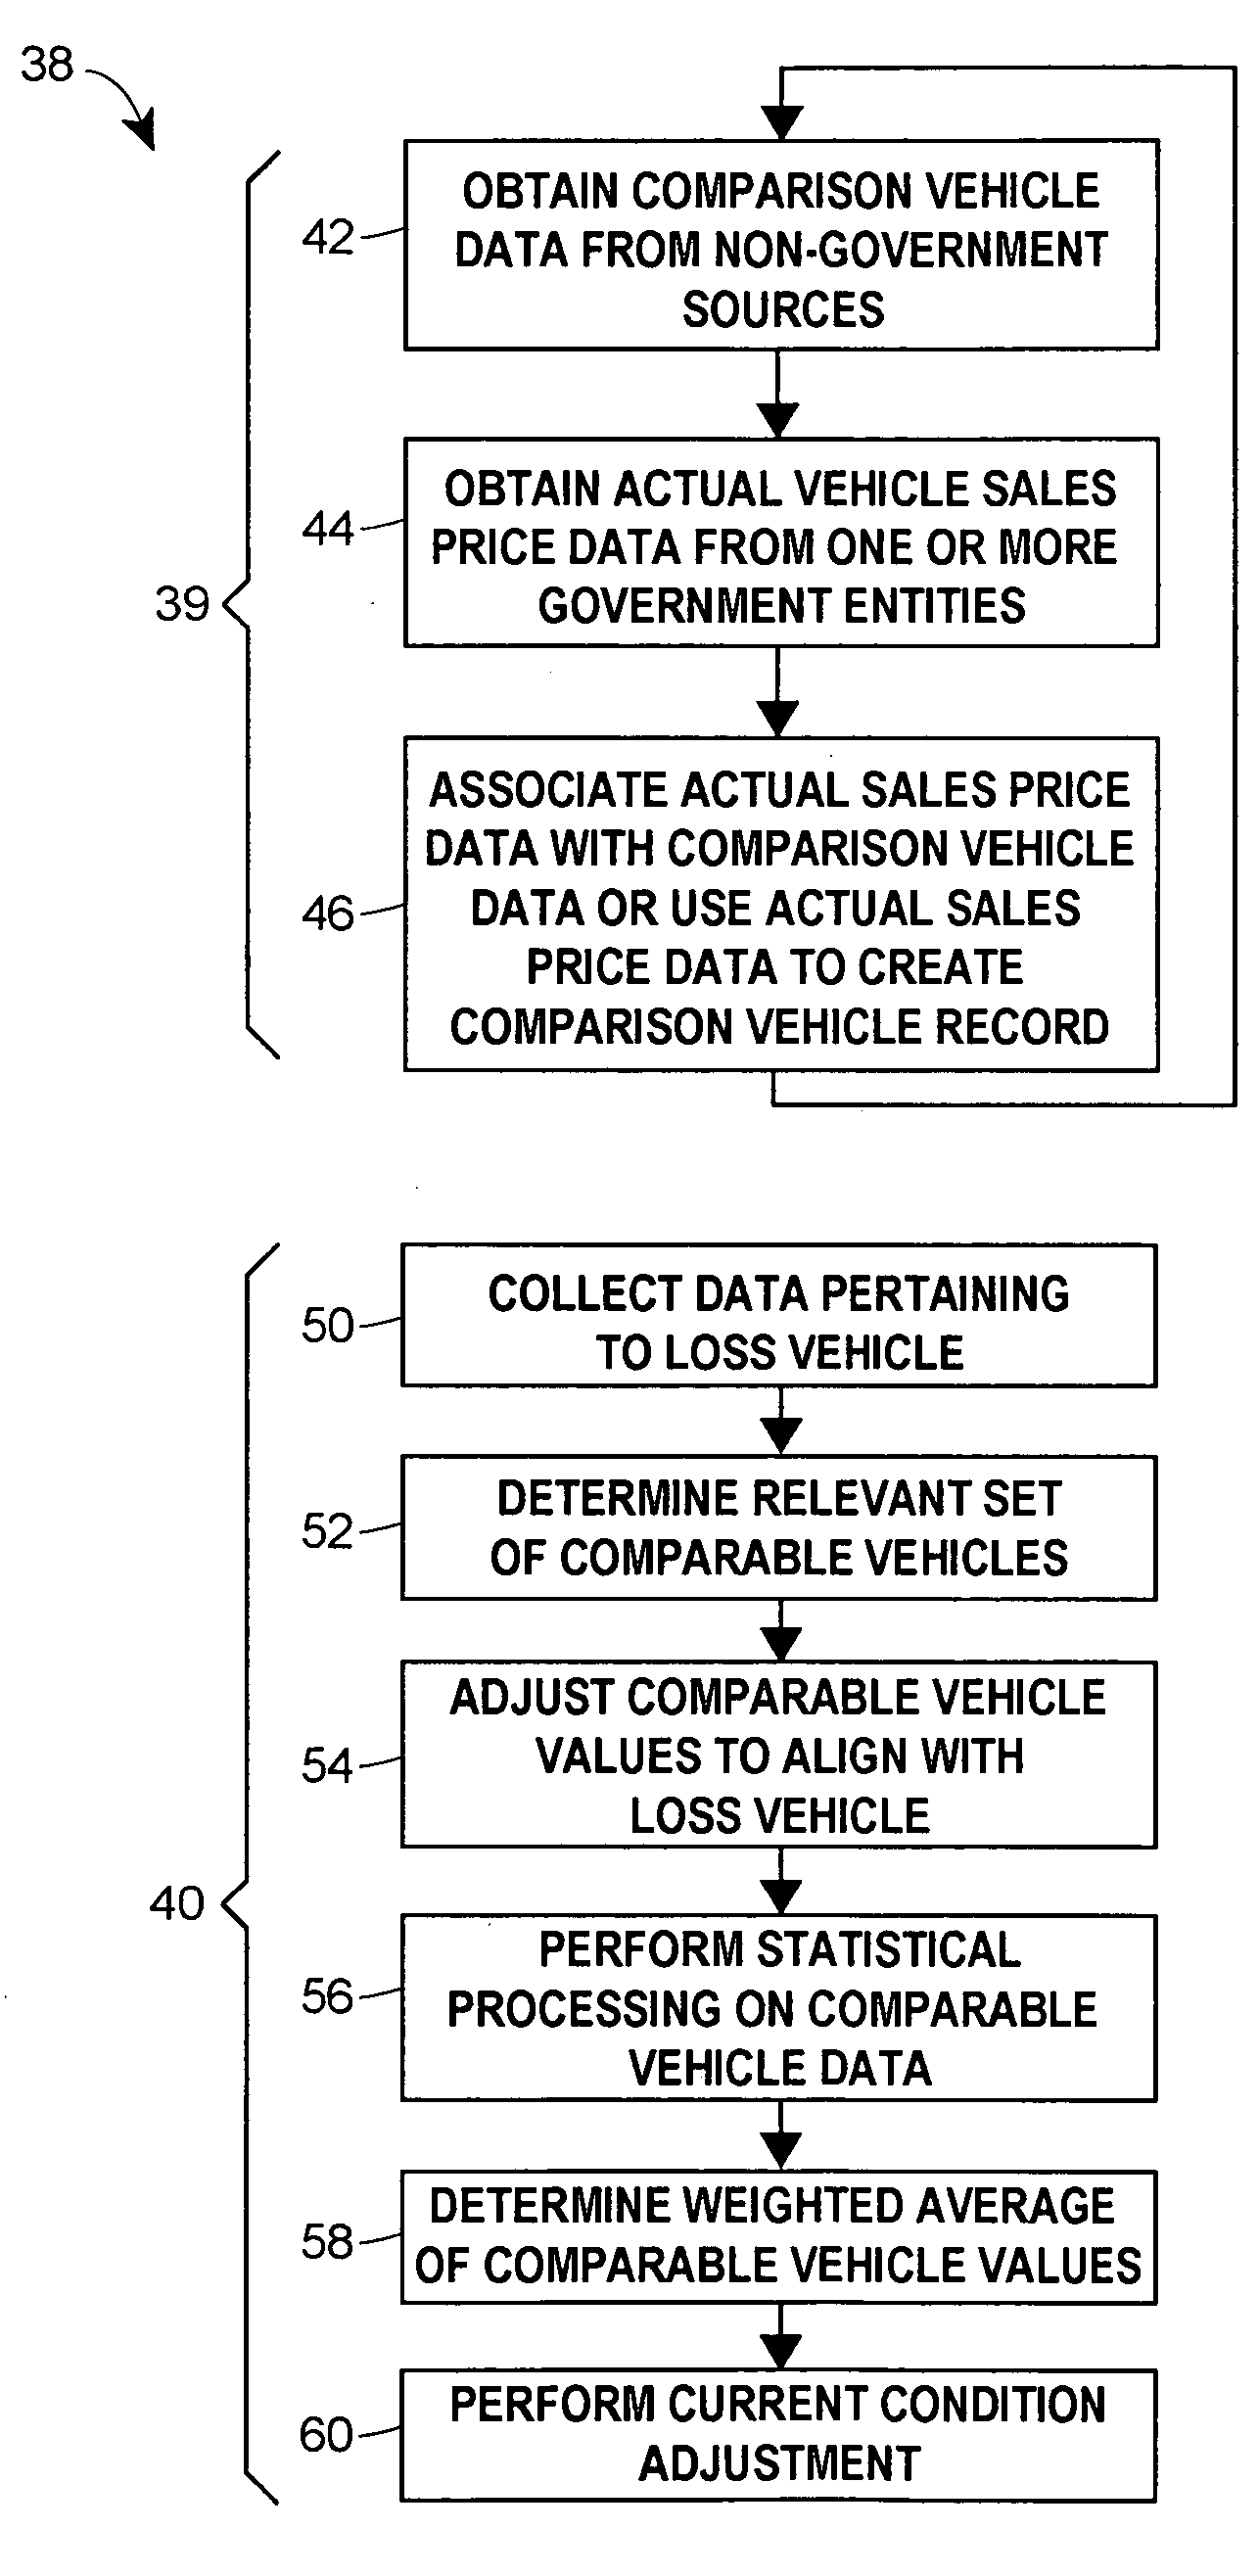 Method and apparatus for obtaining and using vehicle sales price data in performing vehicle valuations